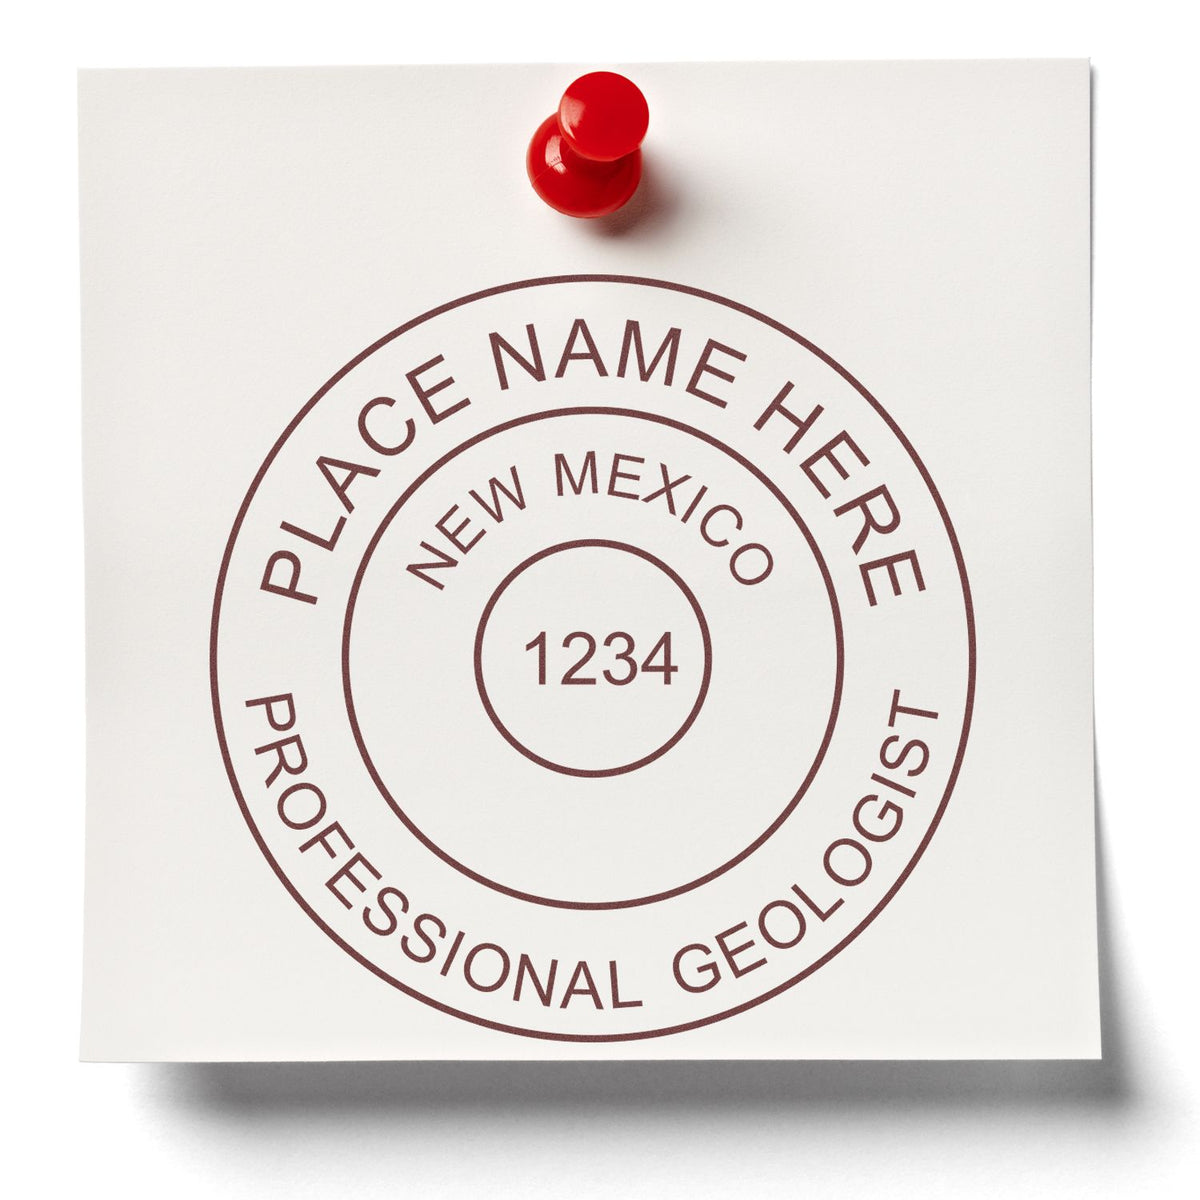 Another Example of a stamped impression of the Slim Pre-Inked New Mexico Professional Geologist Seal Stamp on a office form